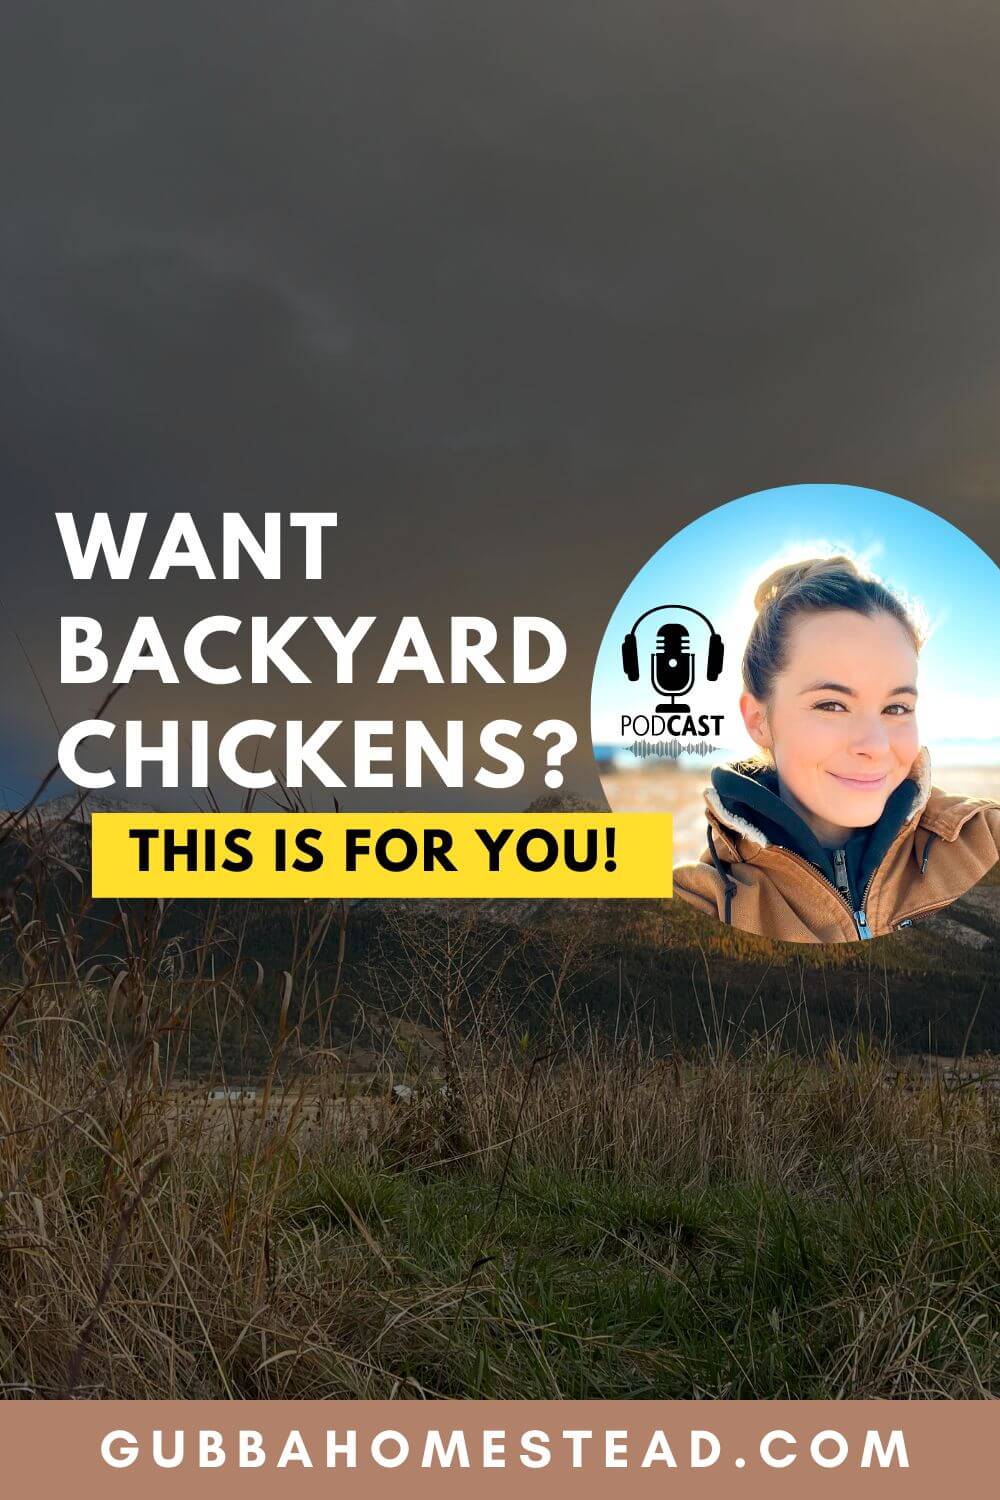 Want Backyard Chickens? This Is For You!